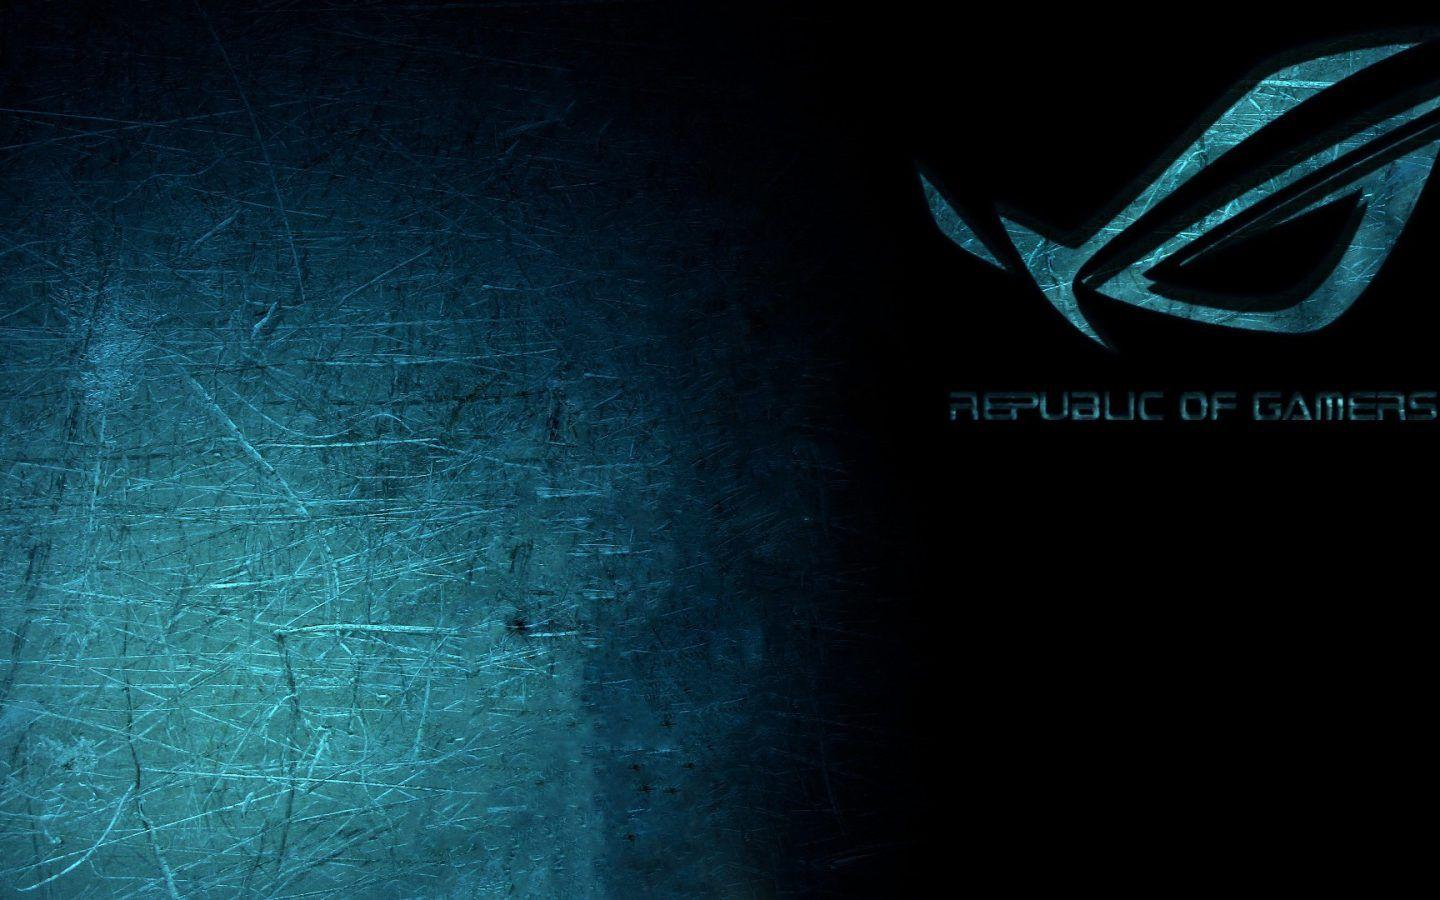 Blue Gaming Wallpapers Top Free Blue Gaming Backgrounds Wallpaperaccess